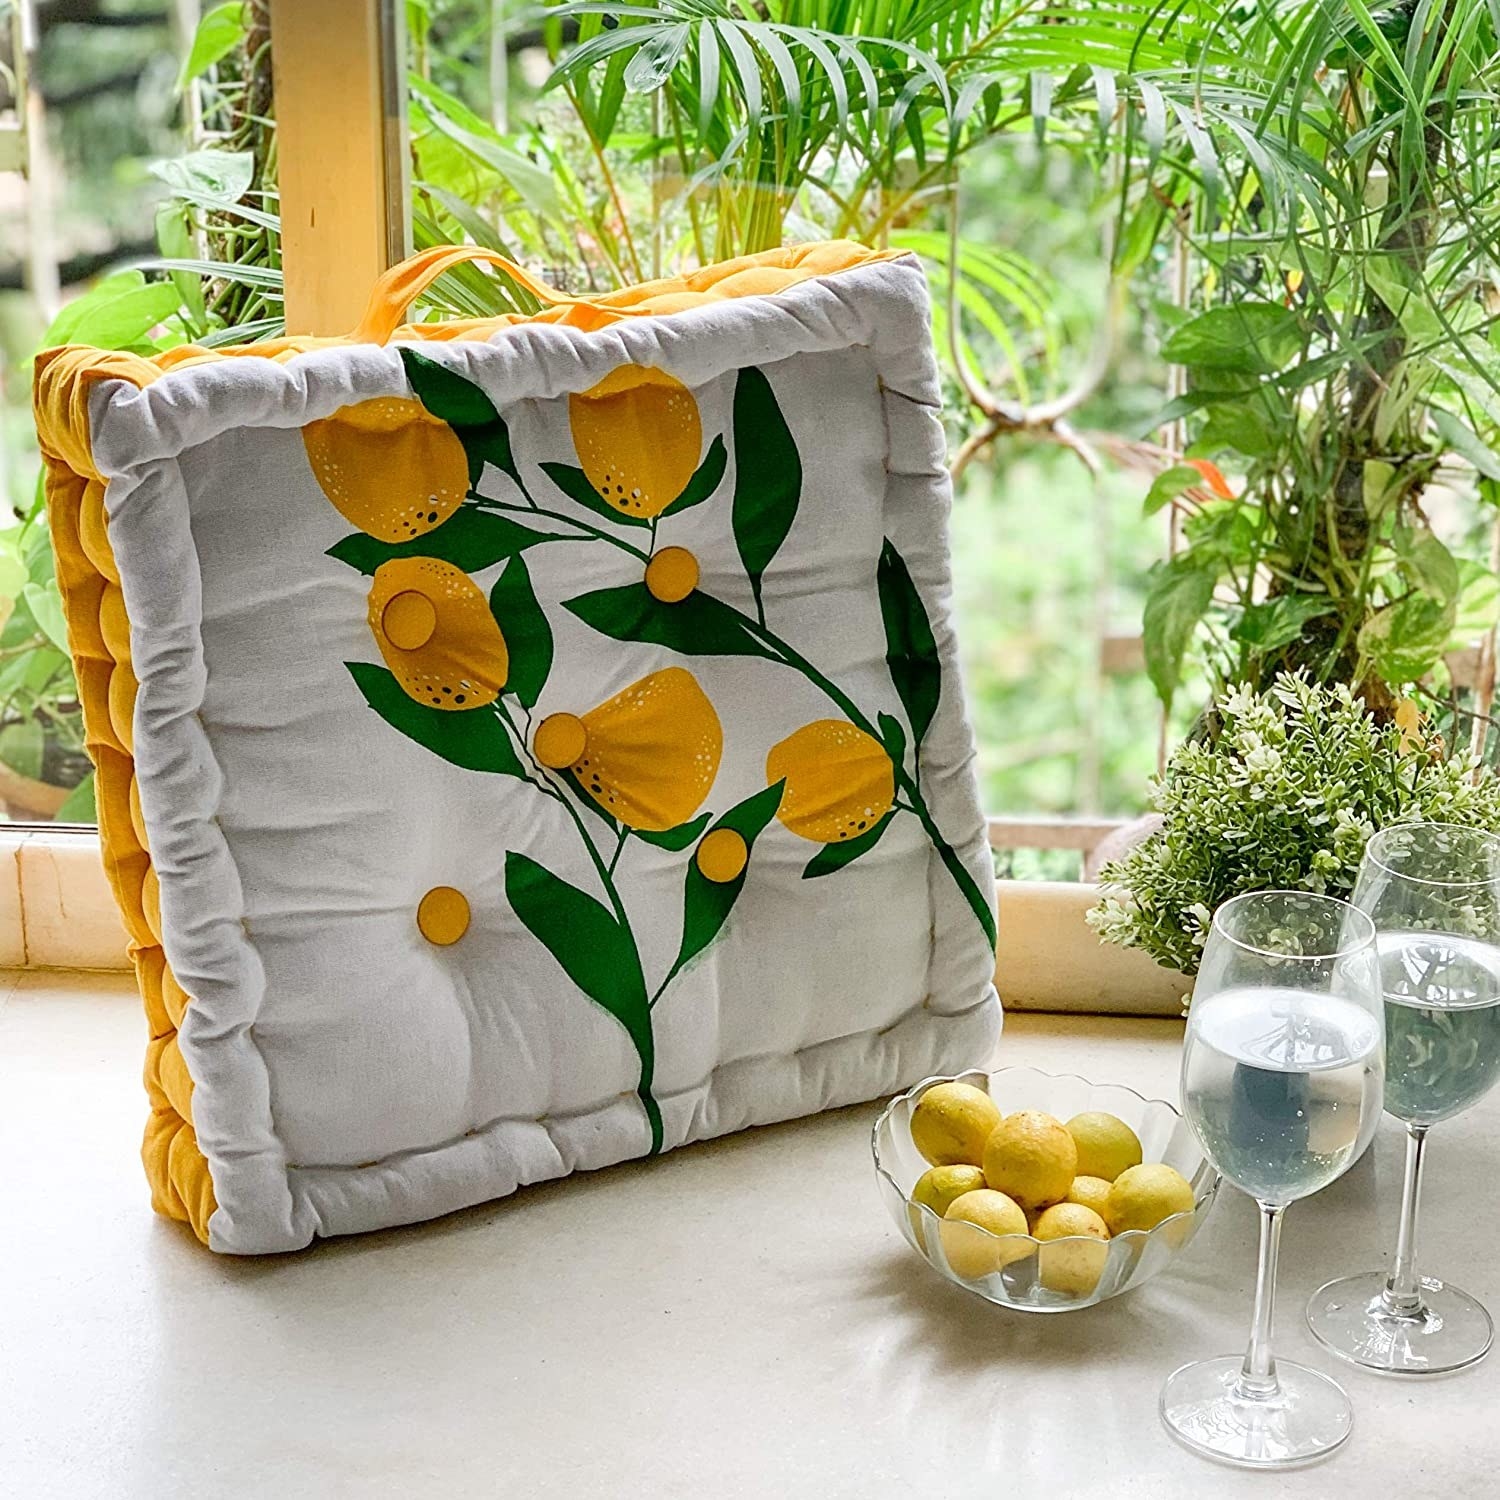 A floor pillow with lemons and glasses of water